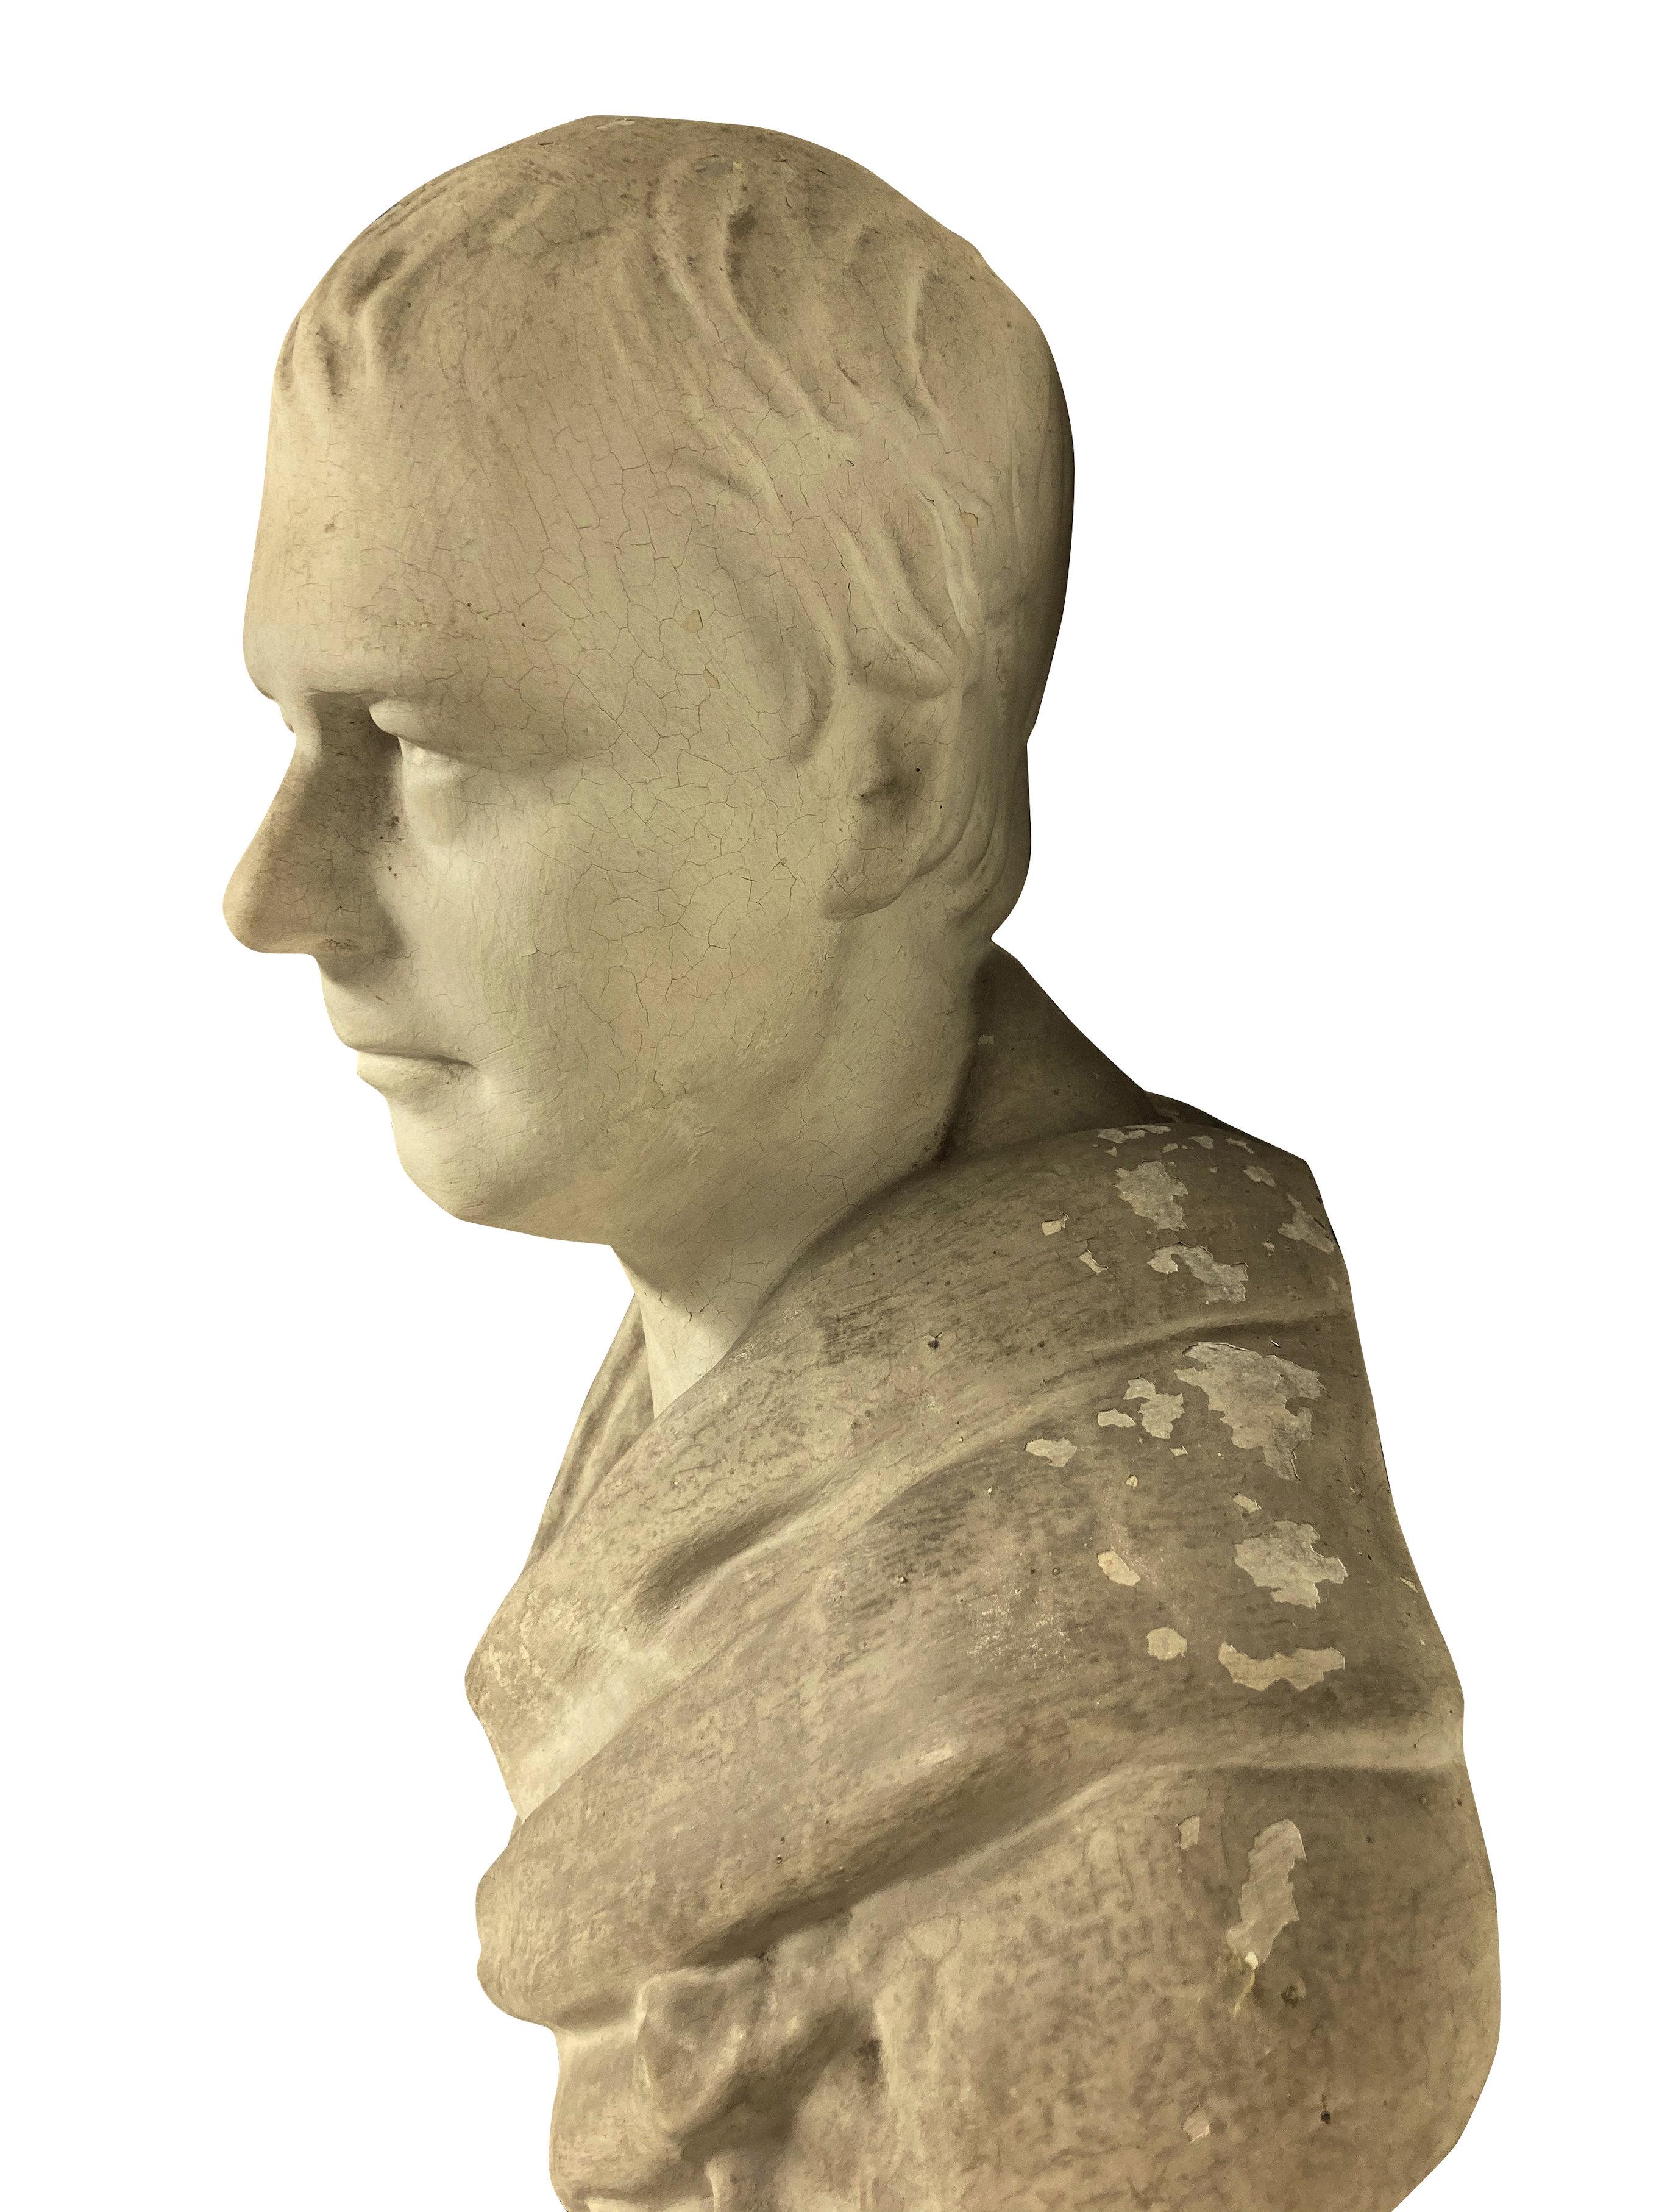 An English classical plaster library bust of a gentleman in Roman clothing, with a wall bracket depicting a Roman eagle.

Sir Walter Scott after Chantrey.